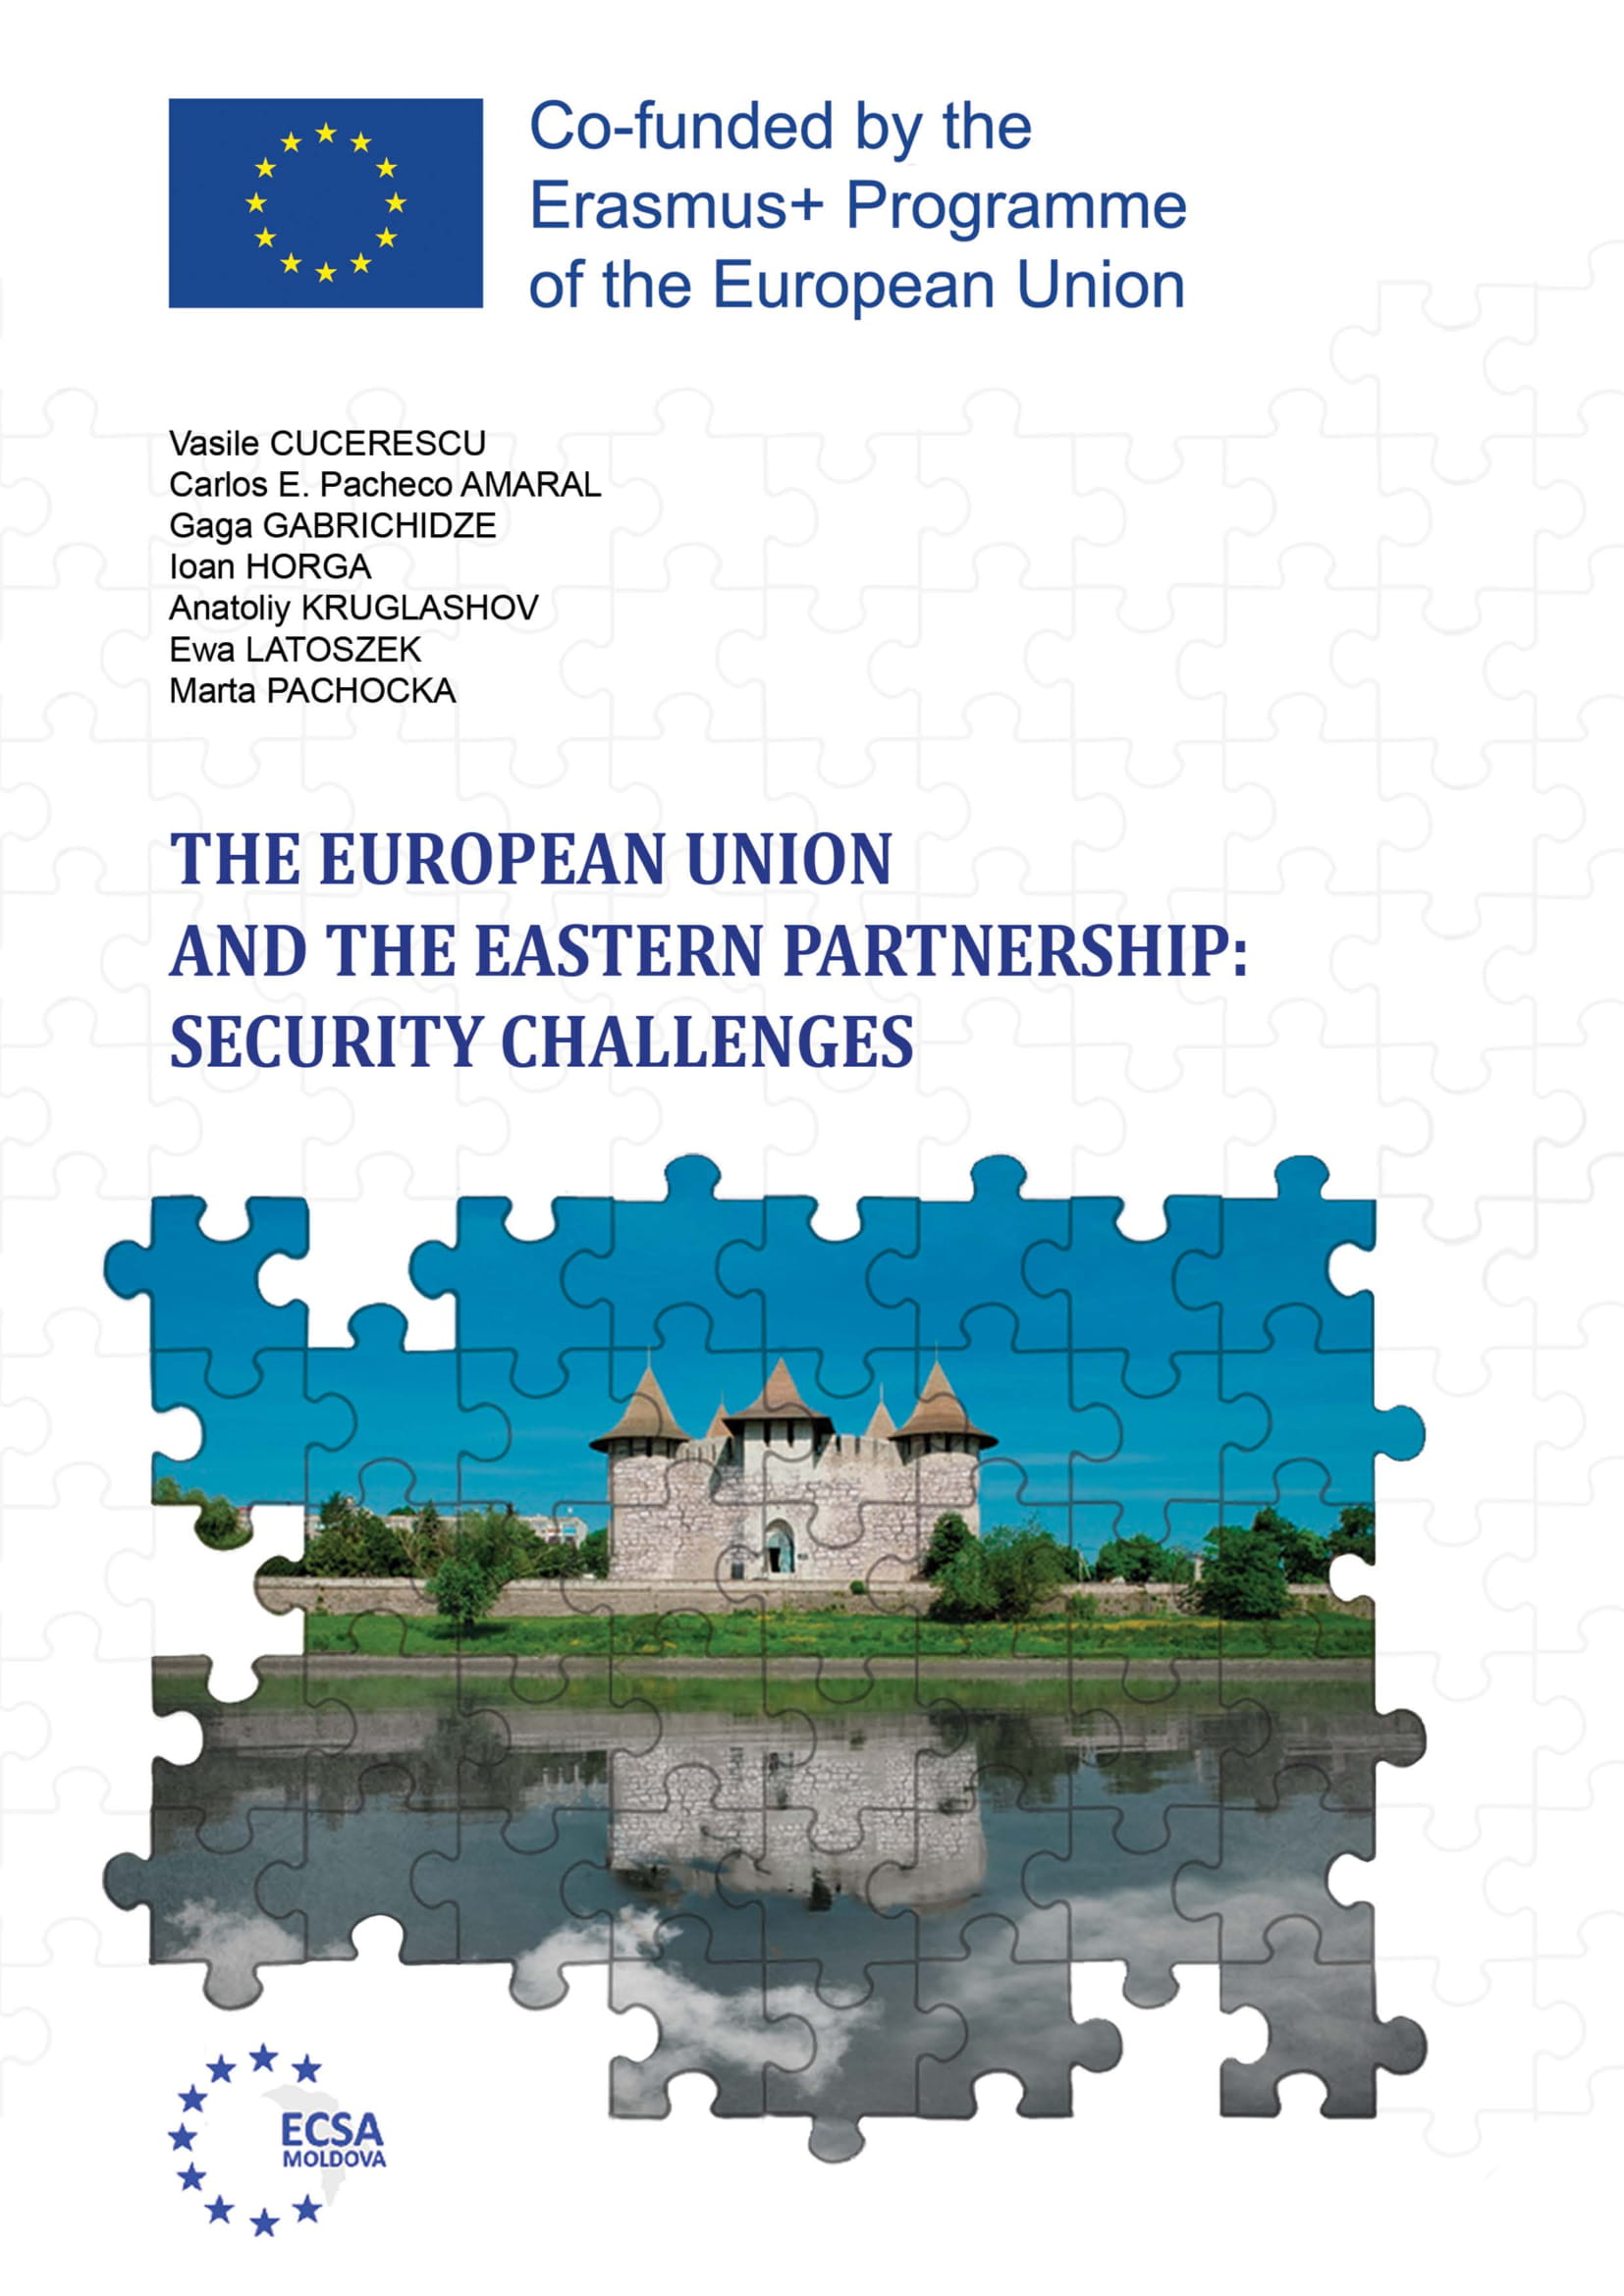 THE EUROPEAN UNION AND ITS EASTERN PARTNERSHIP: ENERGY SECURITY CHALLENGES Cover Image